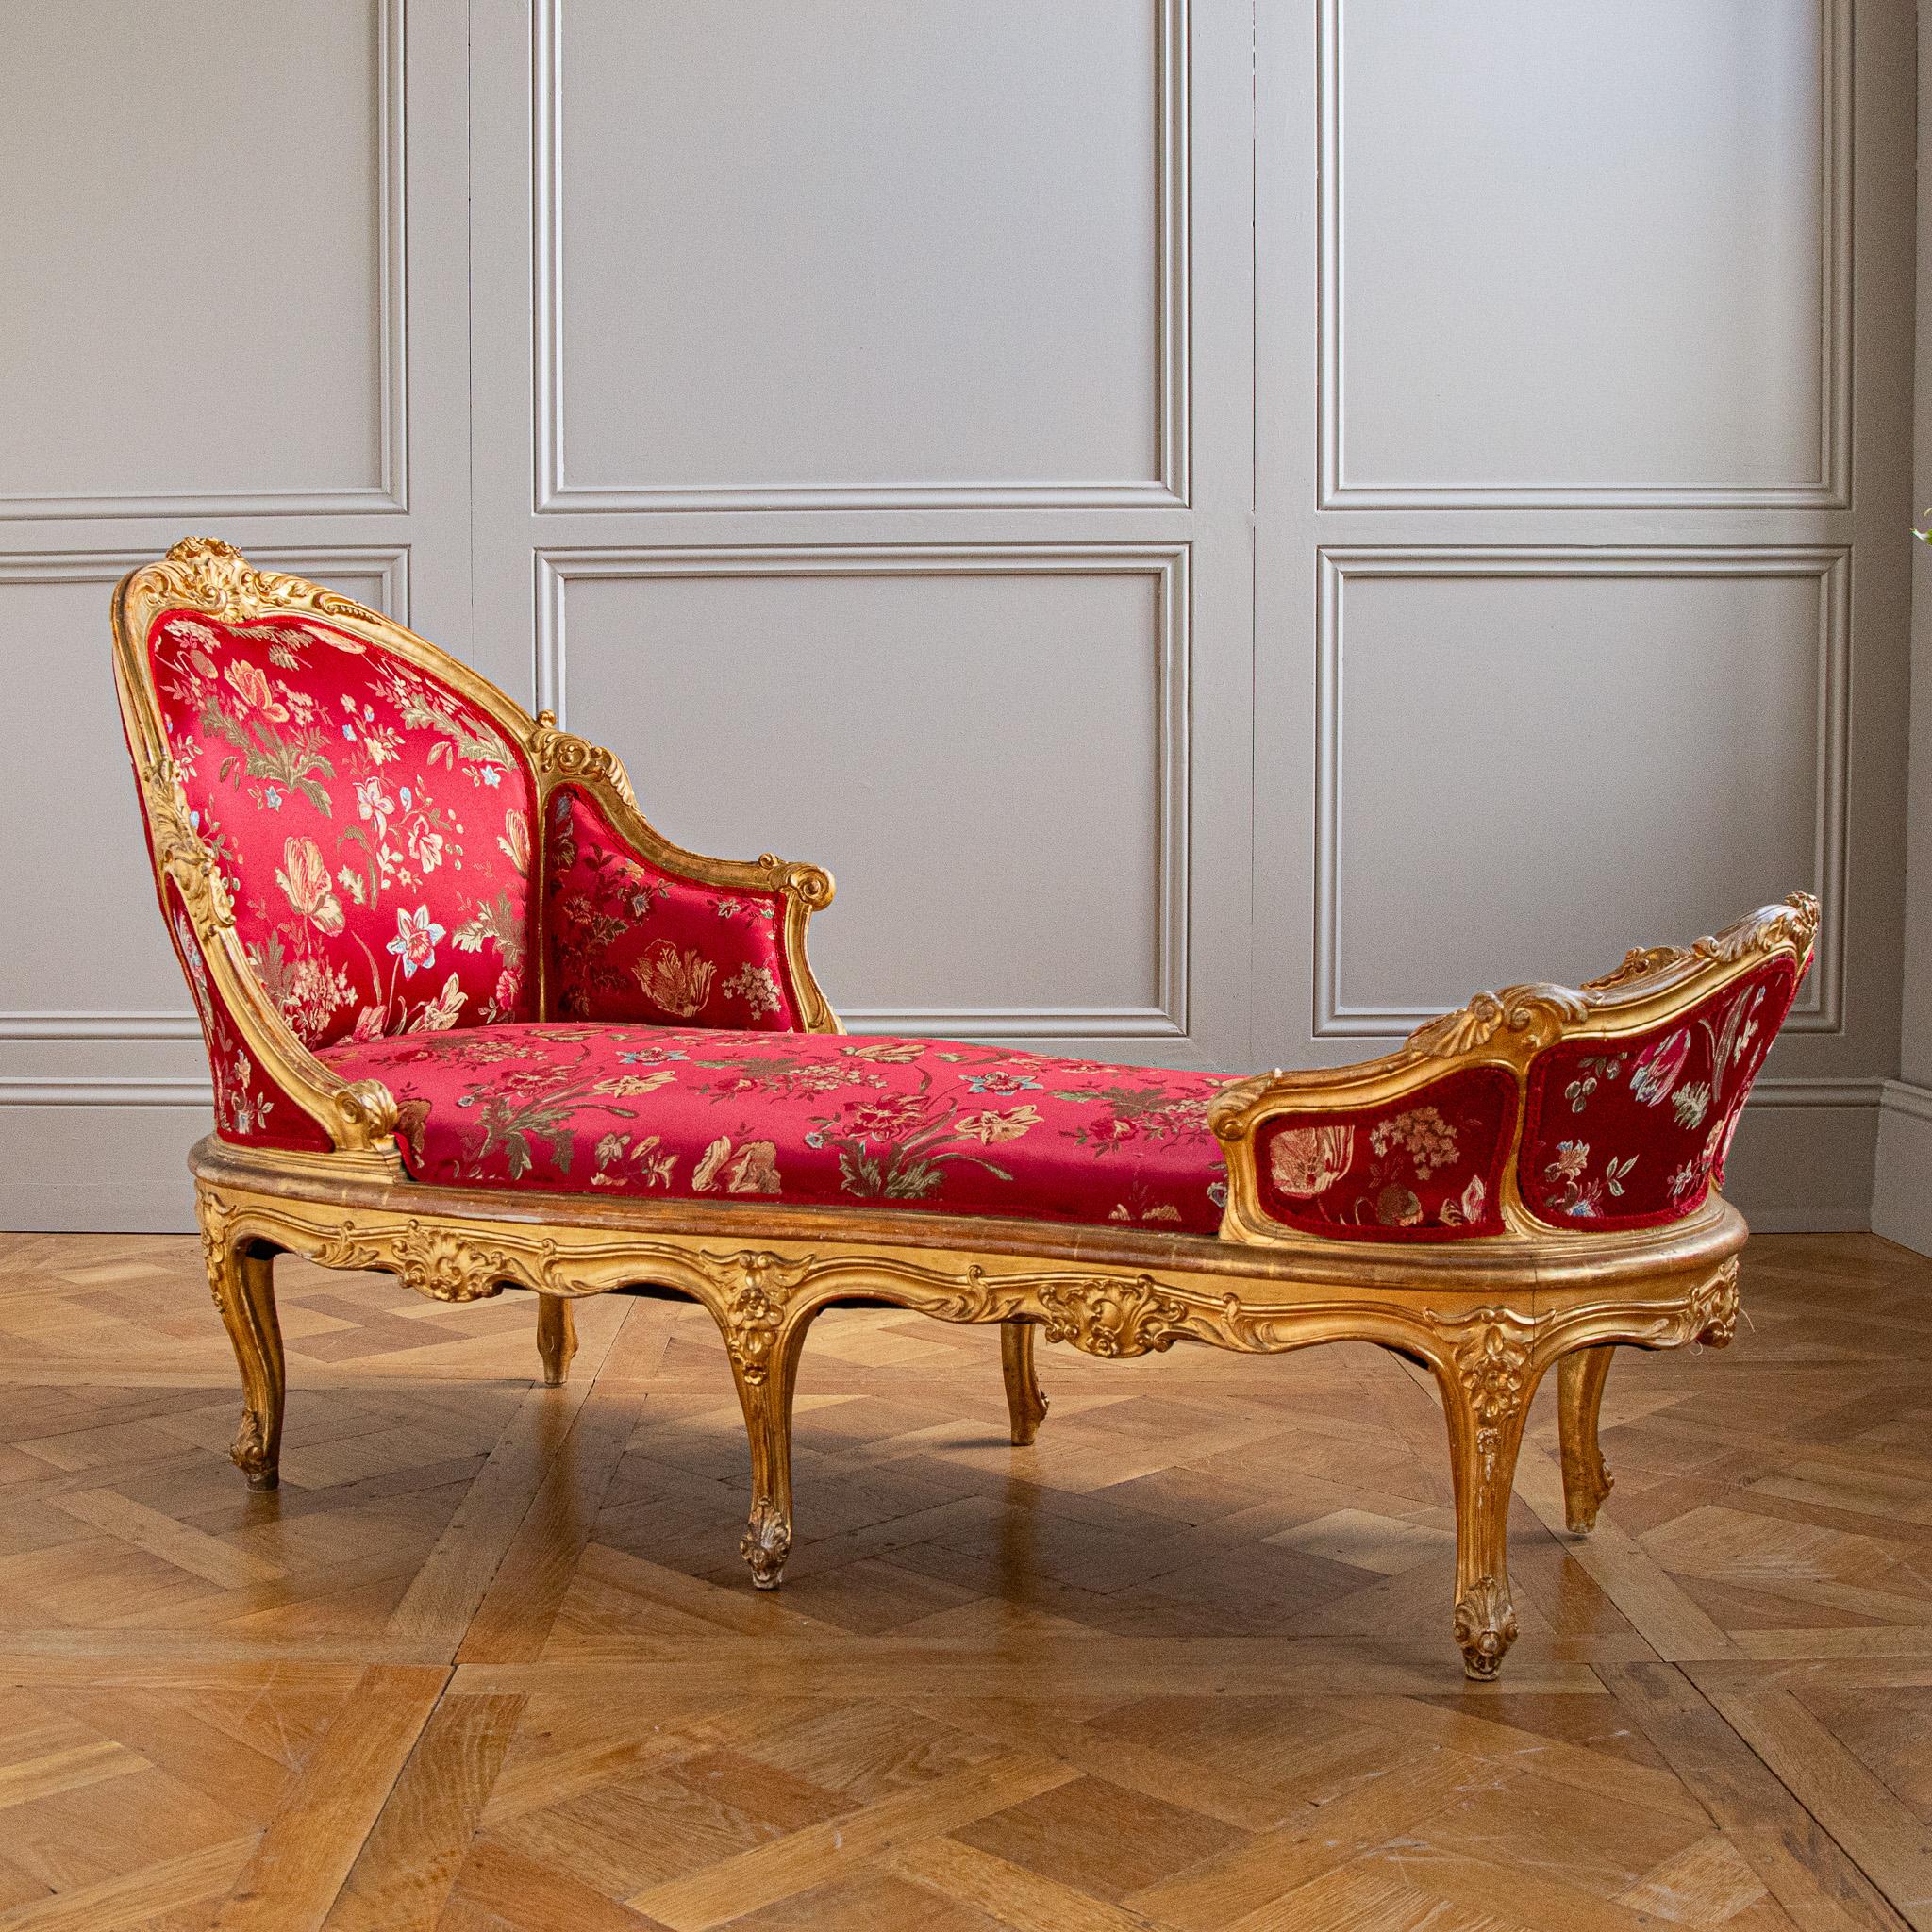 Circa 1880 Italian Giltwood LXV Style Chaise Longue For Sale 1